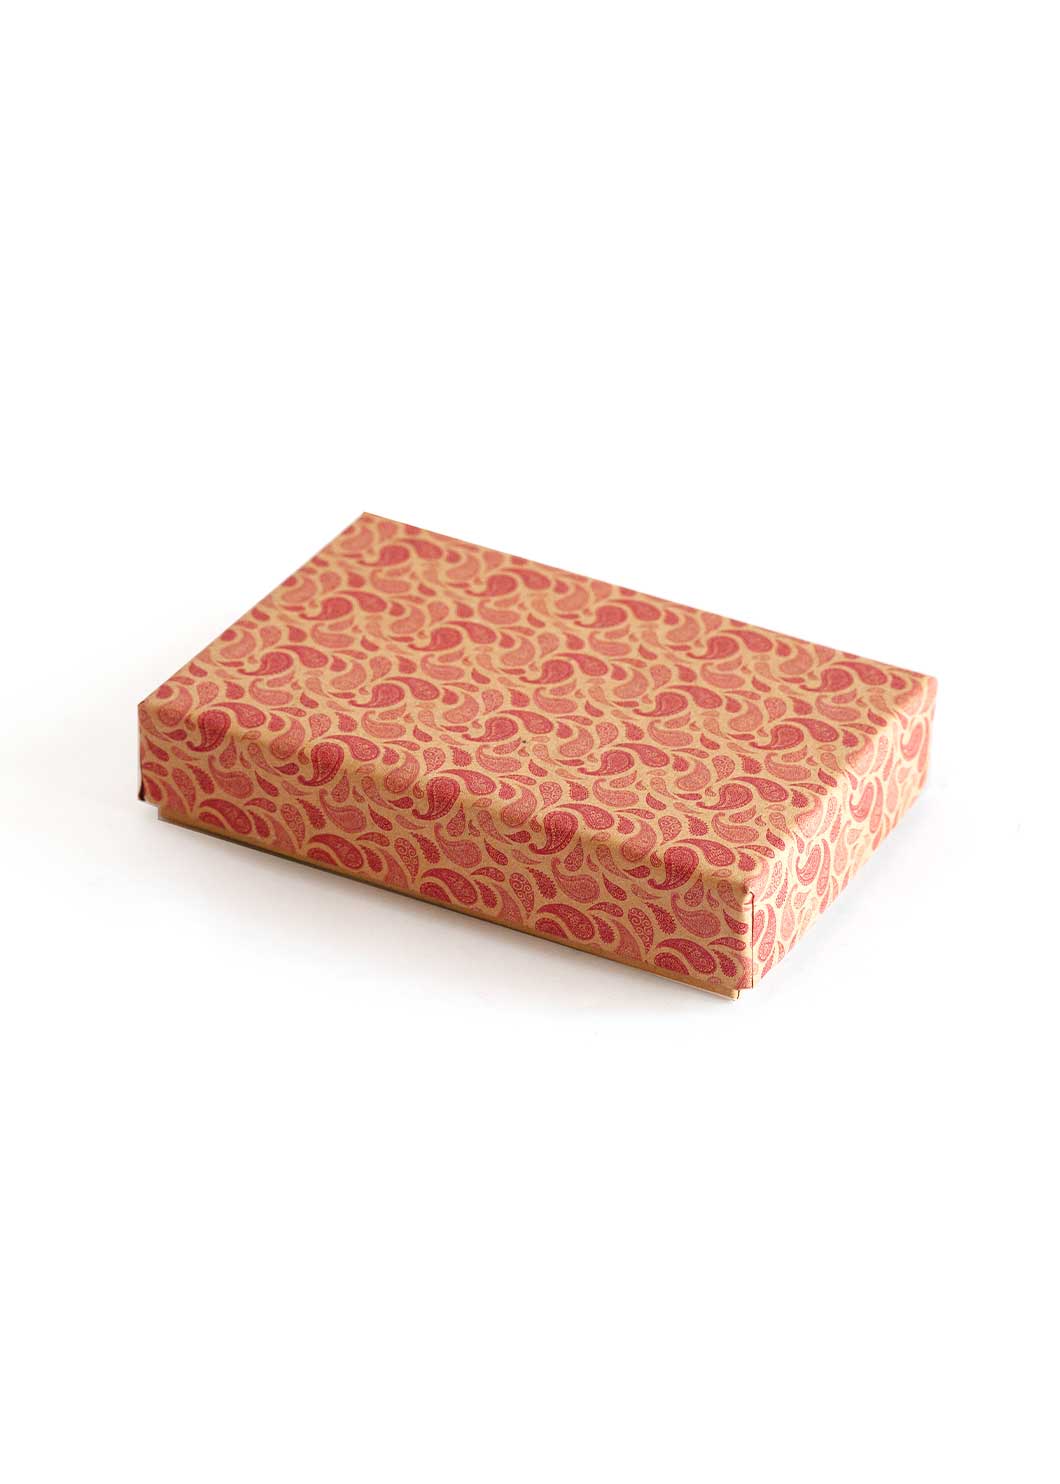 Craft Box Mandala Pattern Design Box for Packing Sweet Boxes | Gift Packing Box - 1 Pao sweet Box With Tray